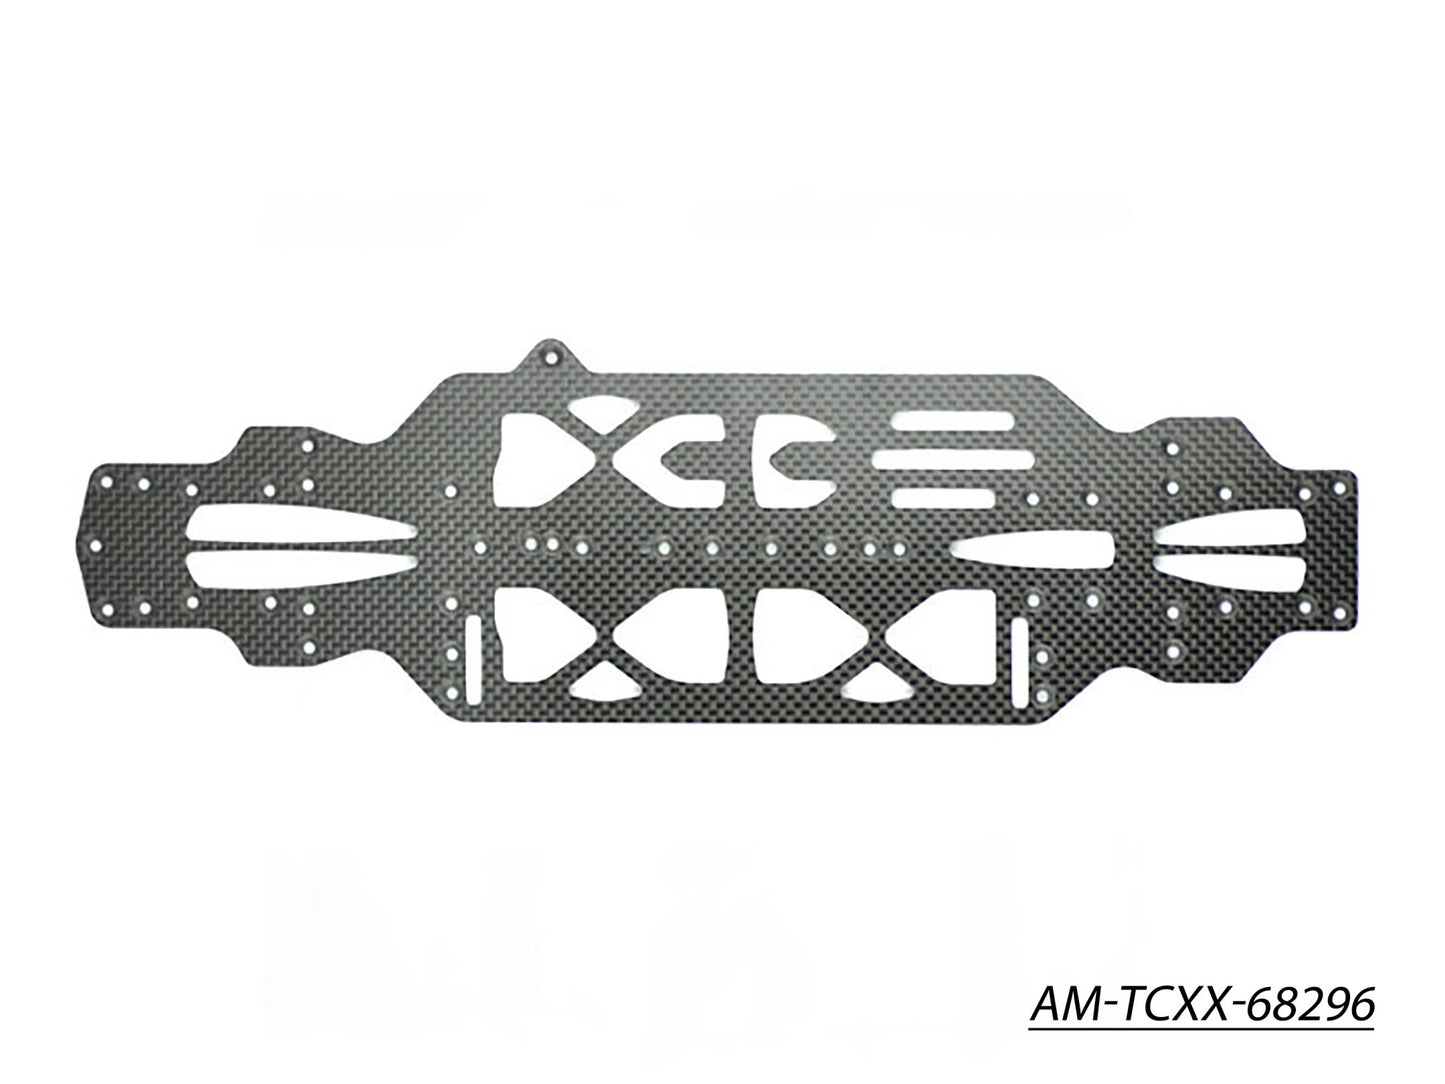 Main Chassis (2.5MM) (AM-TCXX-68296)